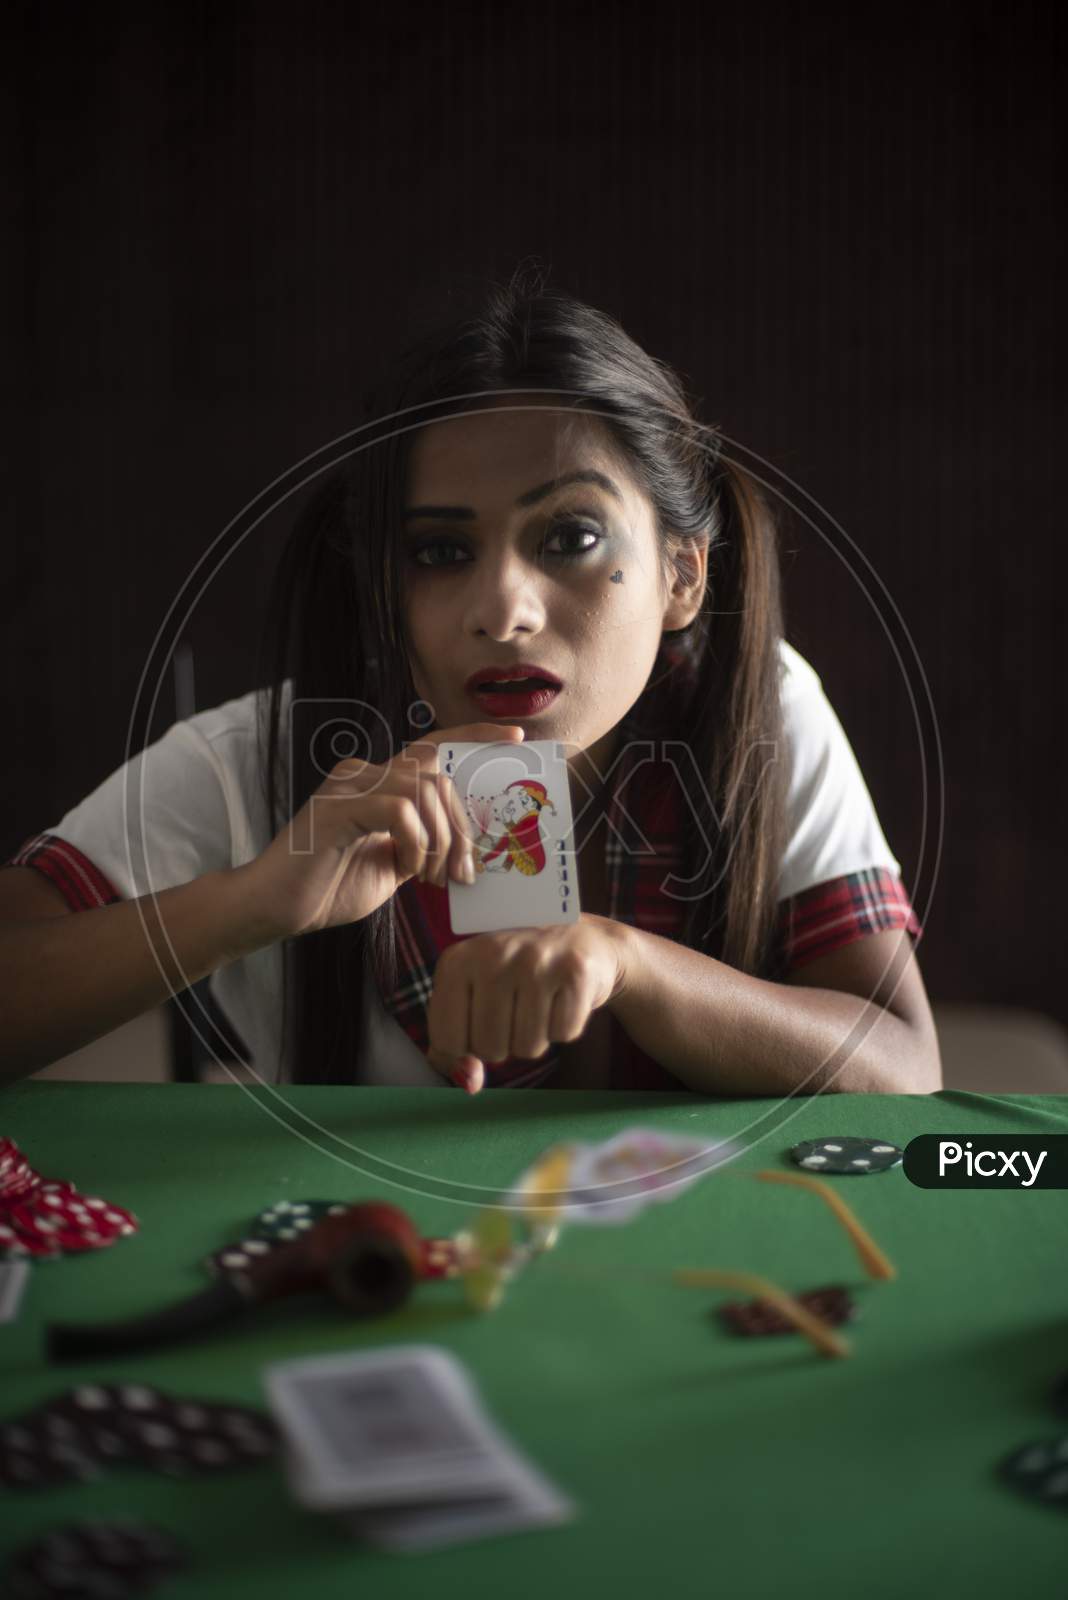 Young Indian Bengali brunette woman in school uniform playing cards on a casino poker table in brown textured copy space studio background. Indian lifestyle and fashion.